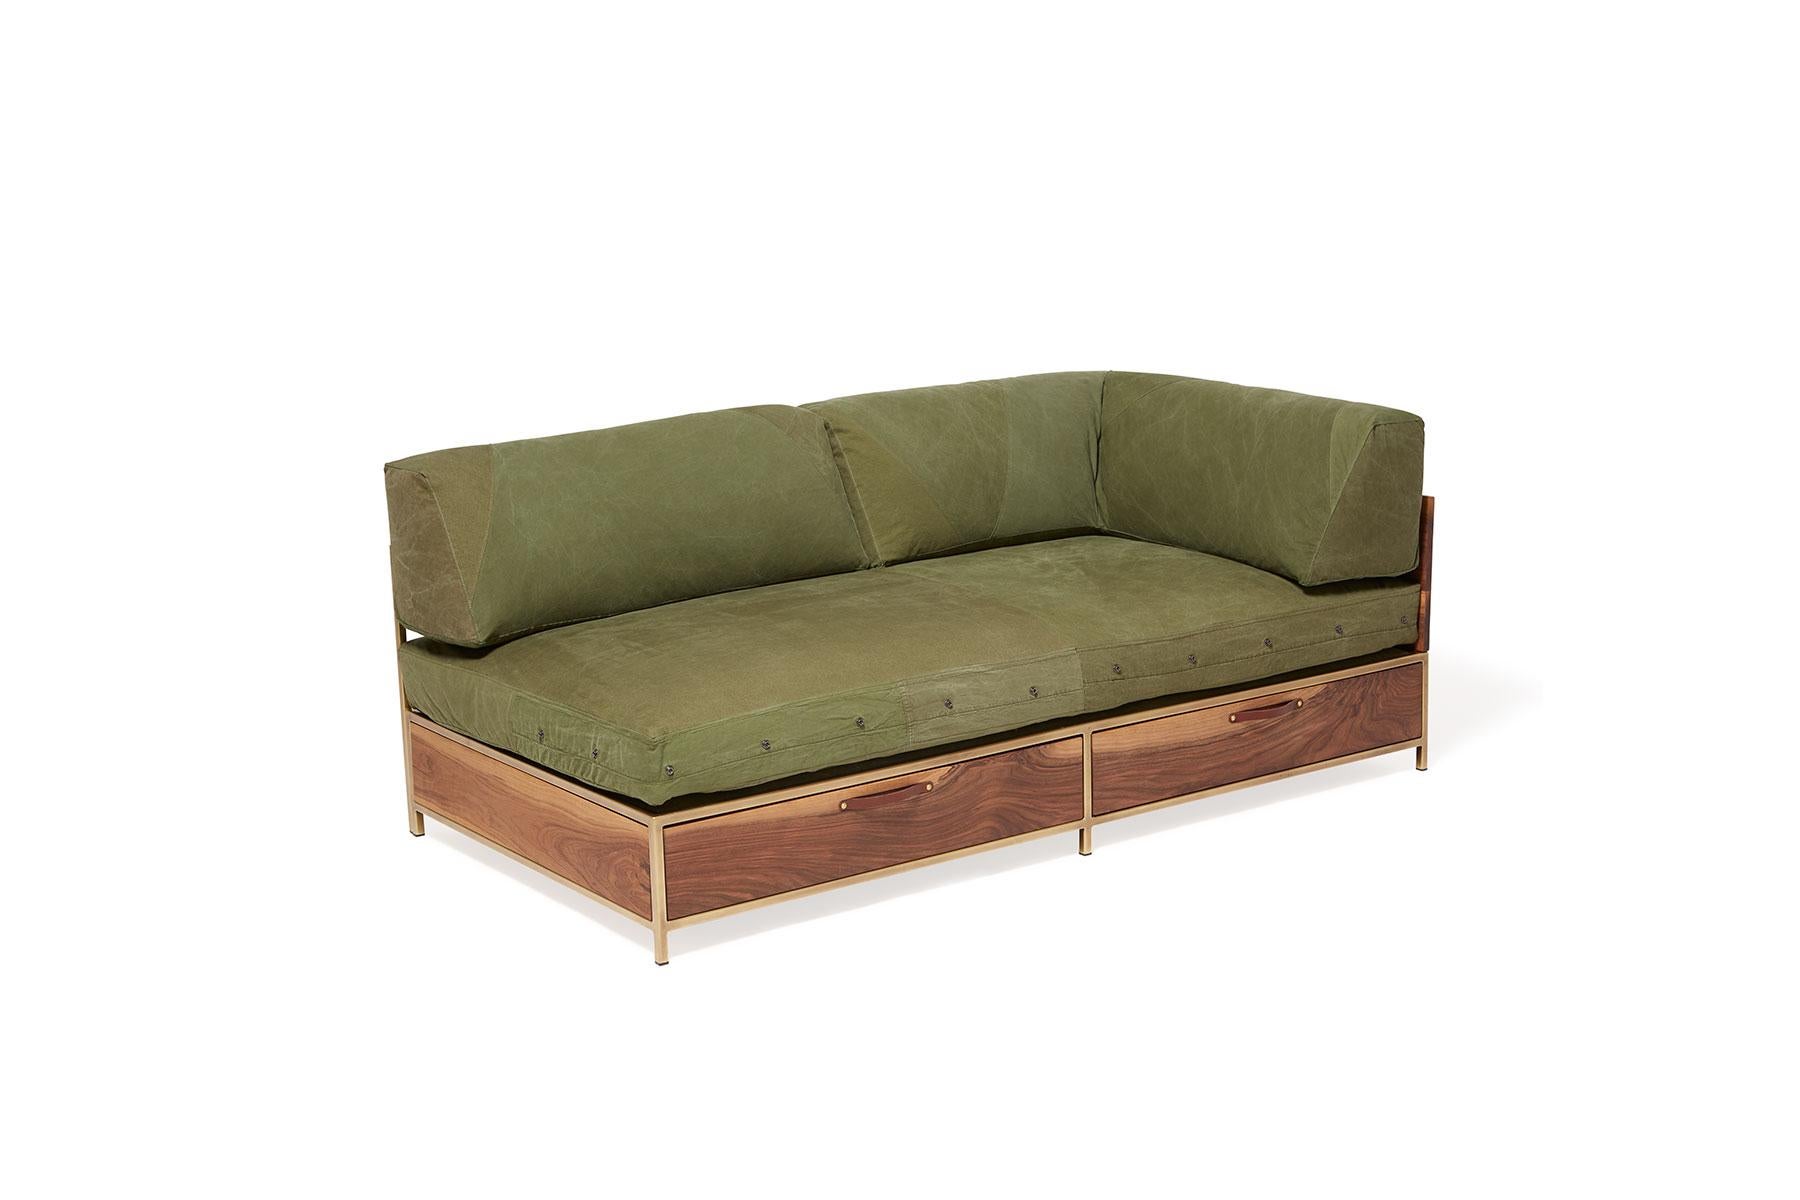 Walnut Vintage Military Canvas Guest Bed Sofa with Storage Drawers For Sale